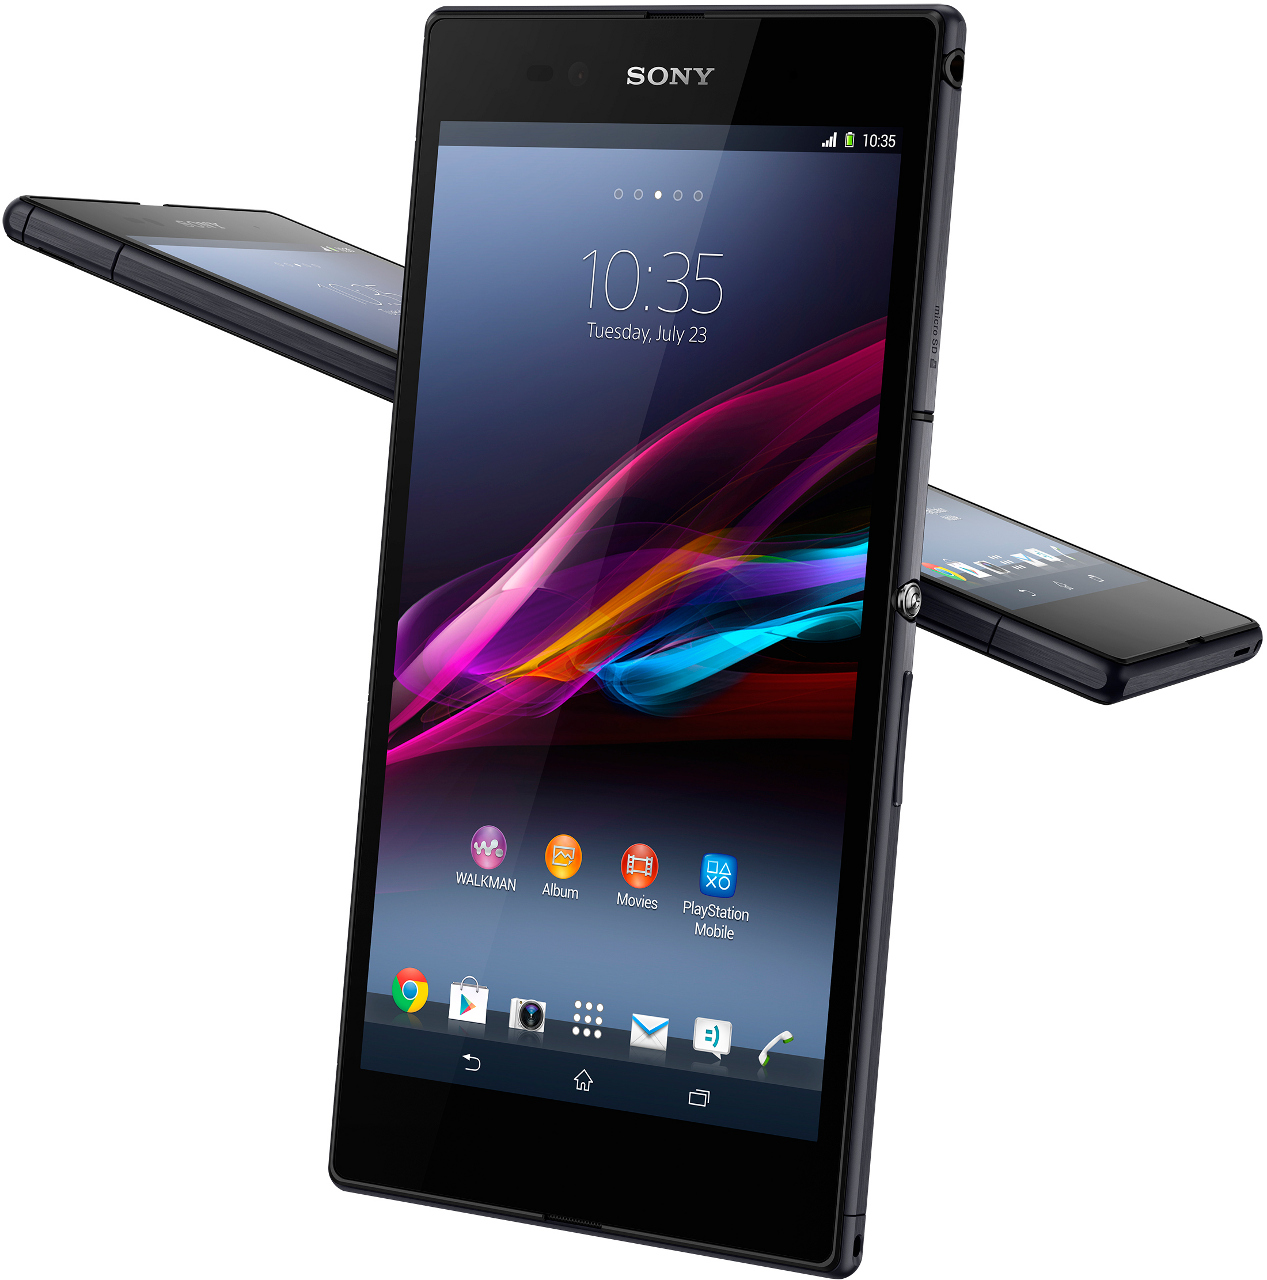 Sony Xperia Z Ultra Wifi Tablet Becomes Official